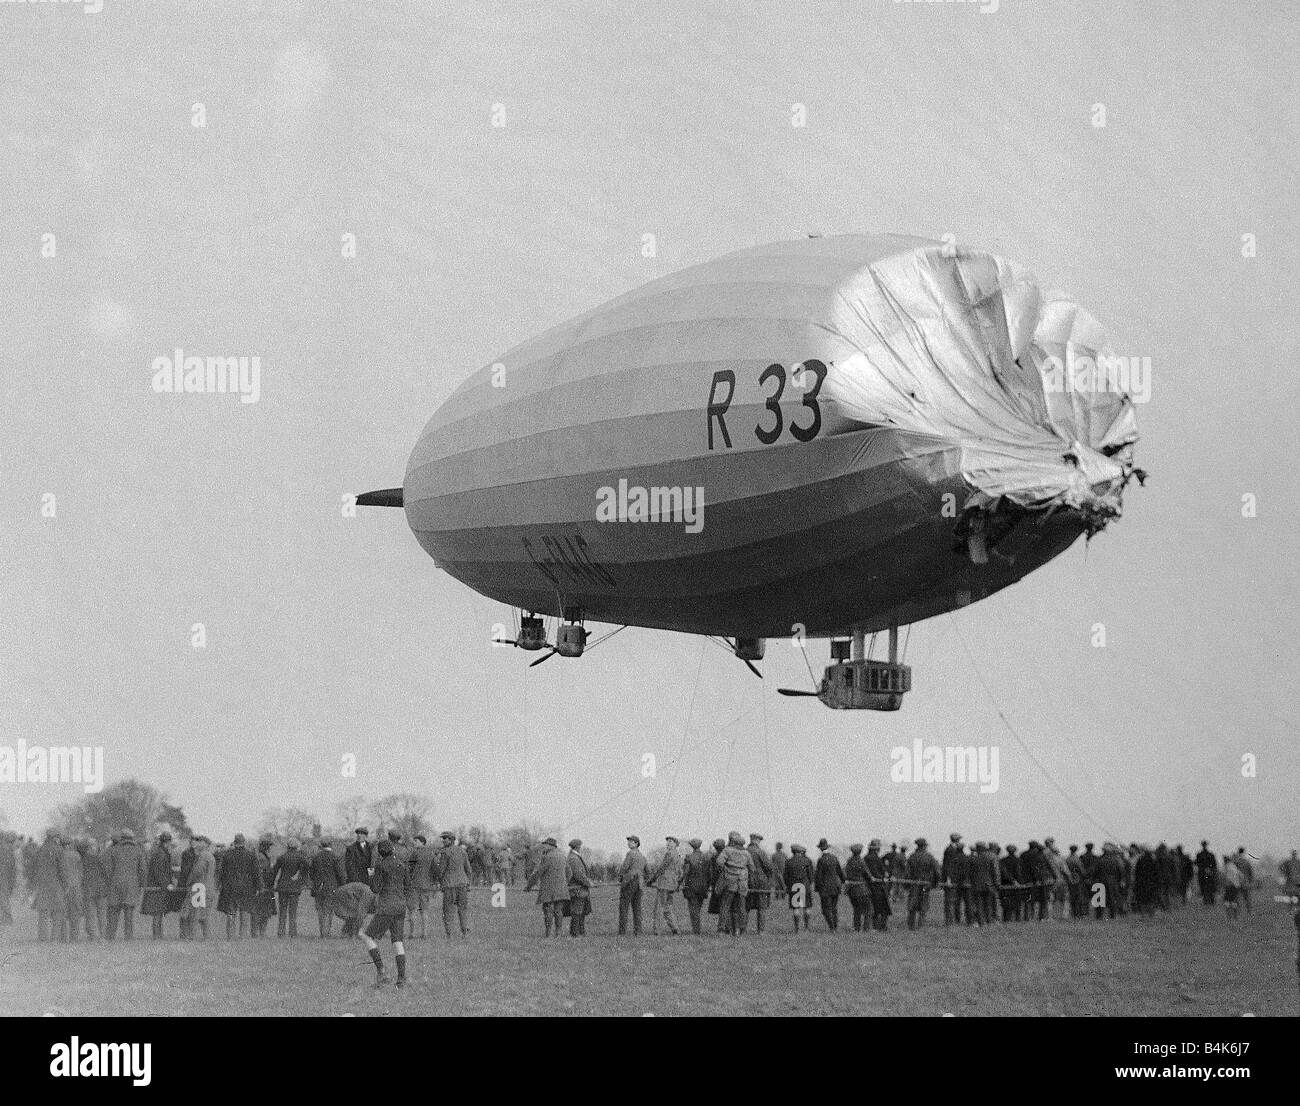 Damaged Armstrong Whitworth R33 Airship April 1925 returns to Pulham after accident with nose section collapsed Stock Photo